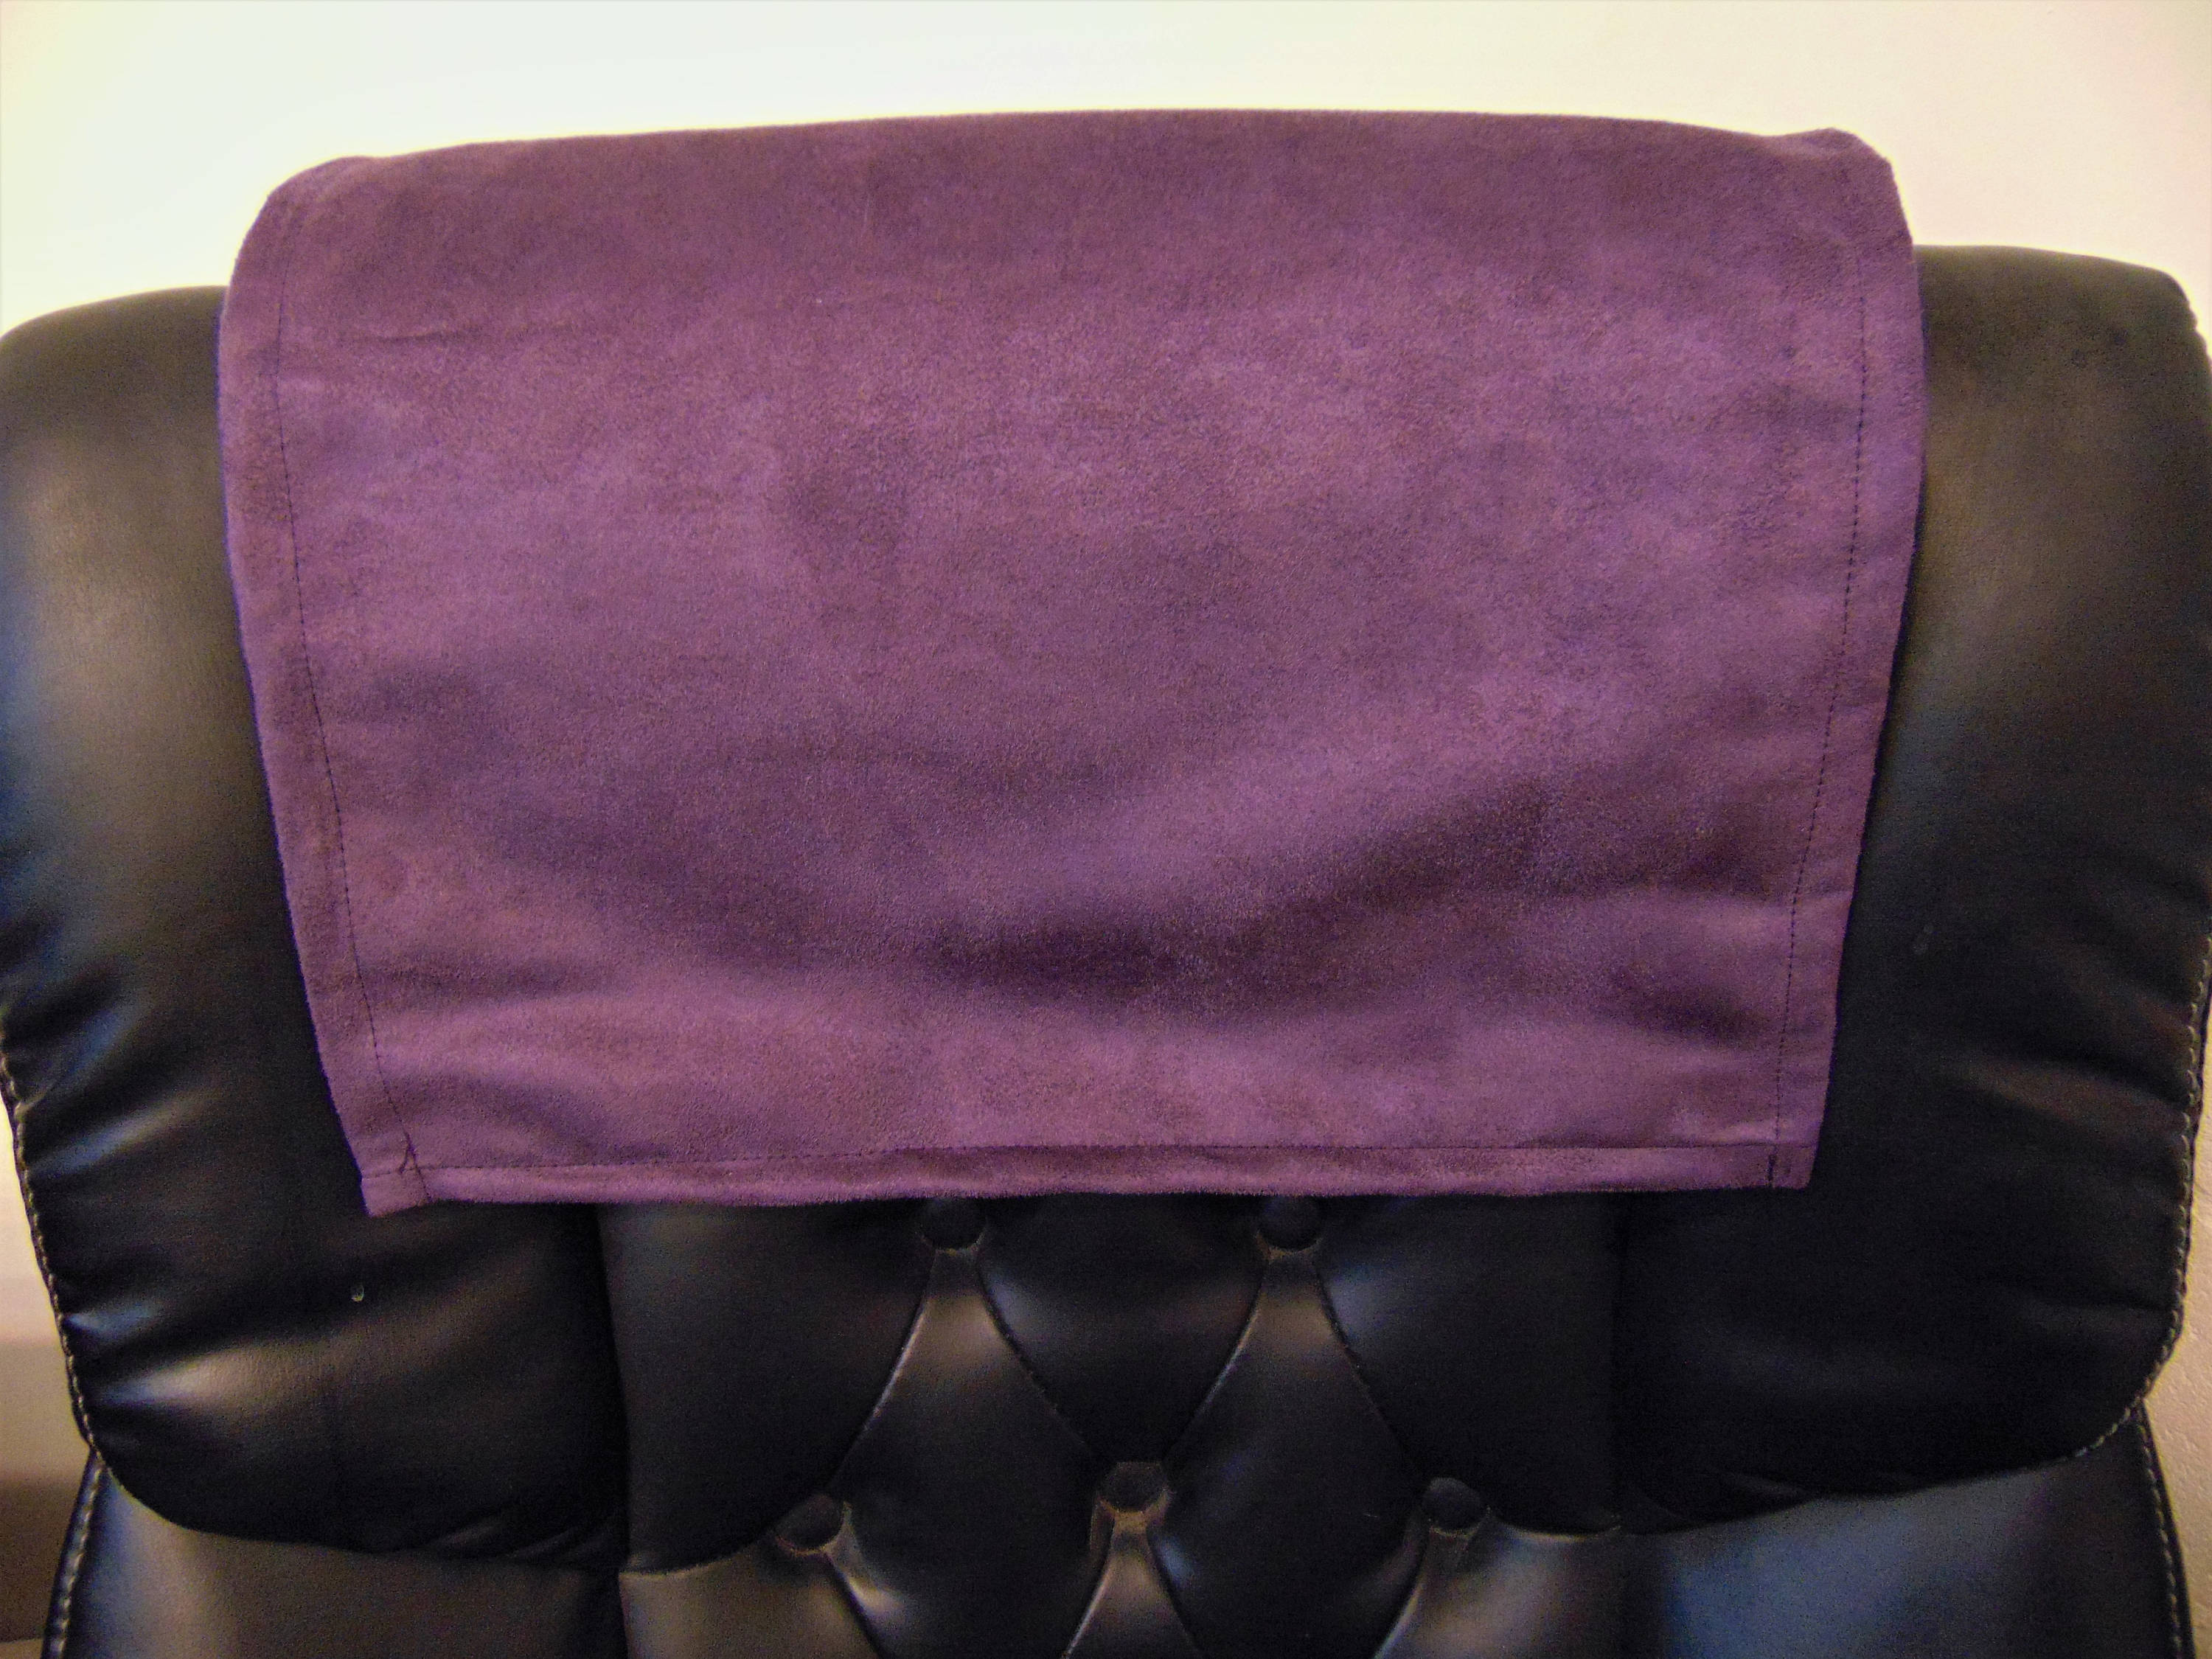 Aubergine Suede 14”x30” Recliner Furniture Protector Cover || Home Décor